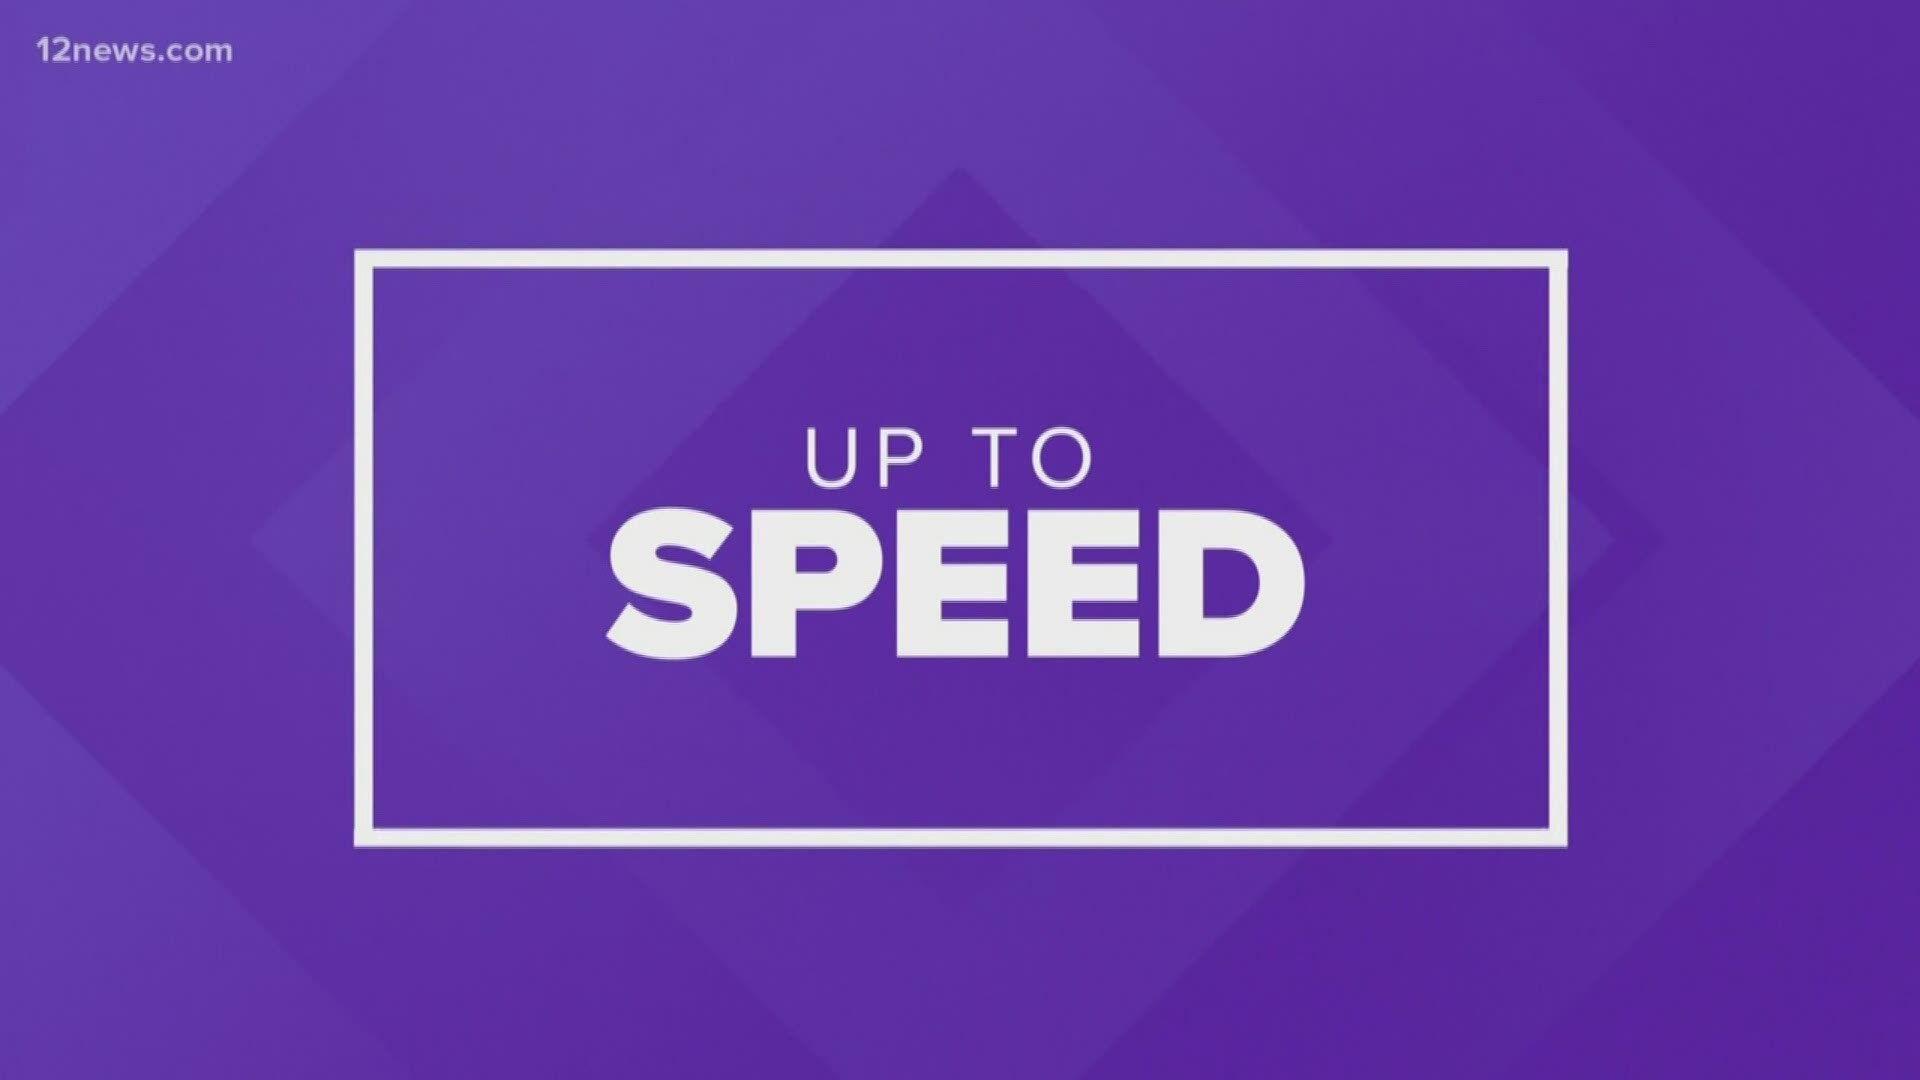 Get "Up to Speed" on the latest news happening in the Valley and across the nation on Wednesday evening.